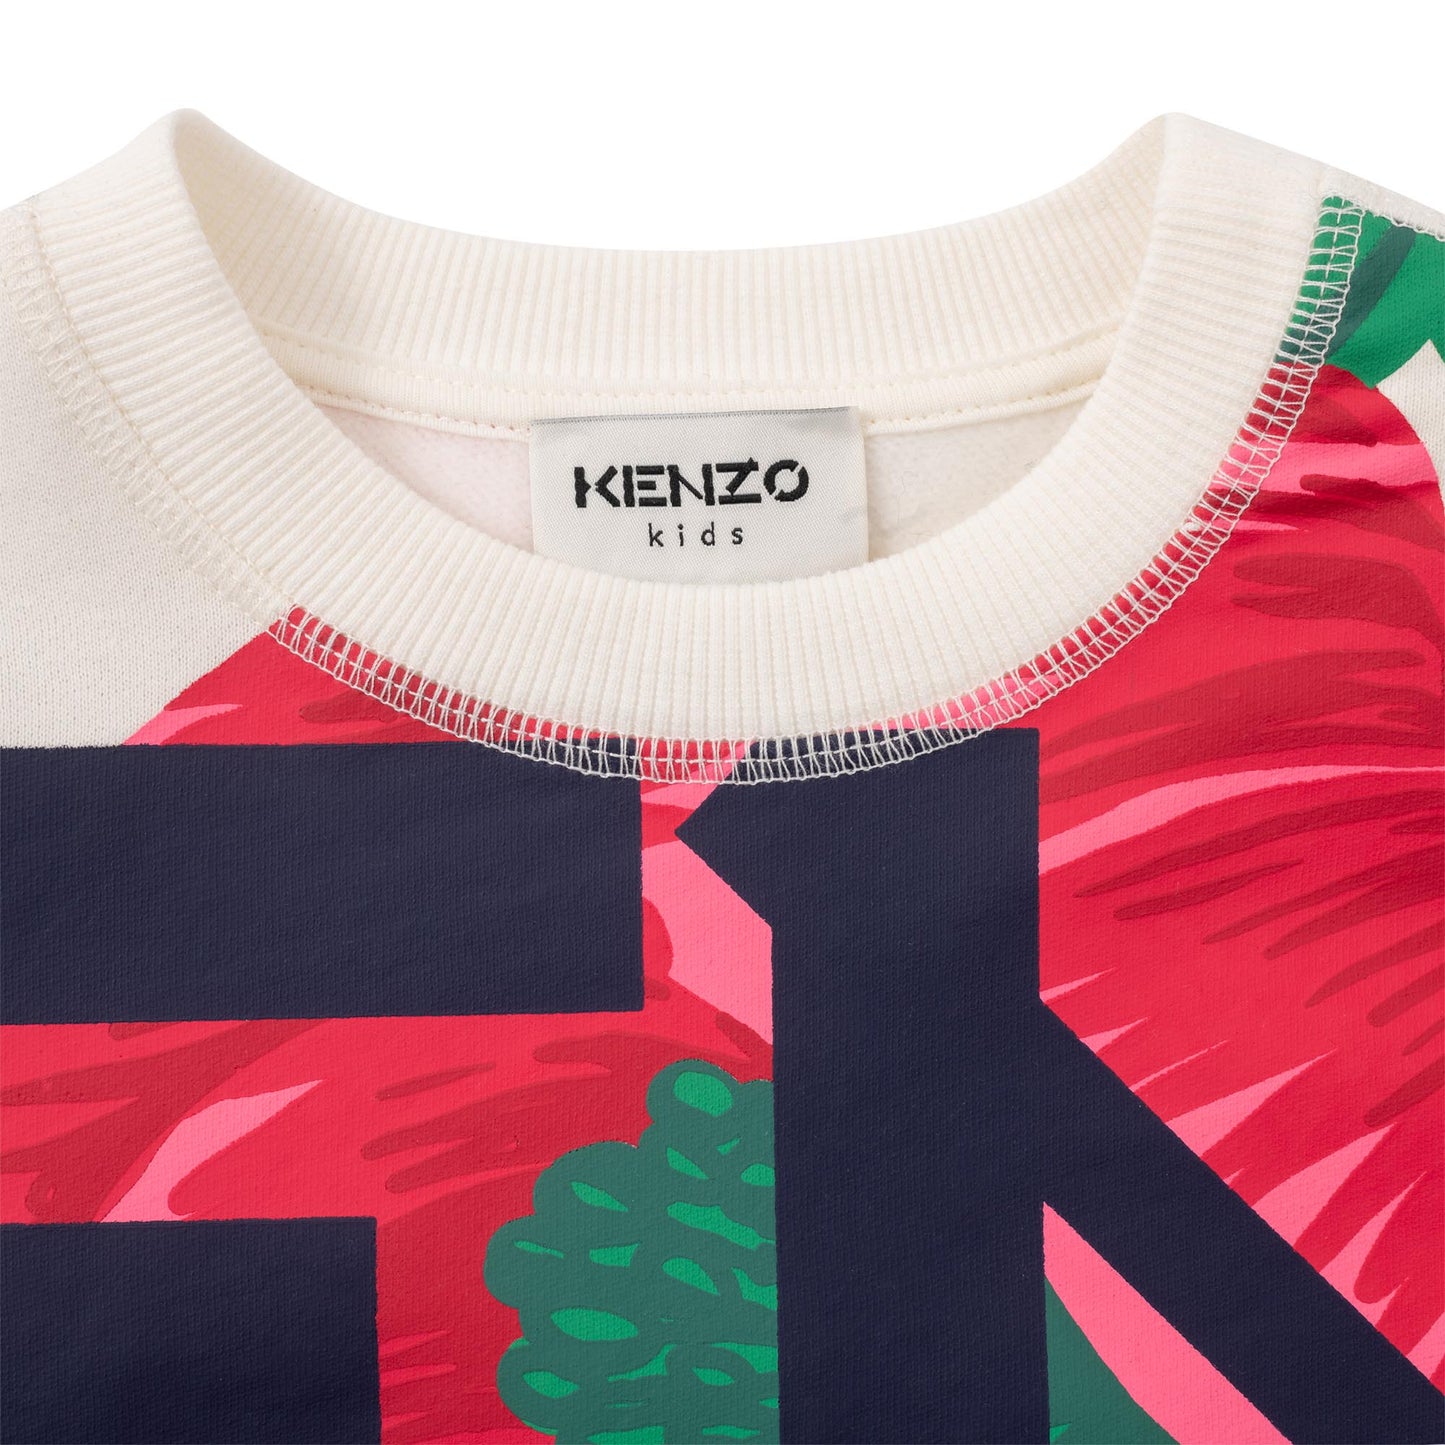 Kenzo Girls Floral Print Pullover